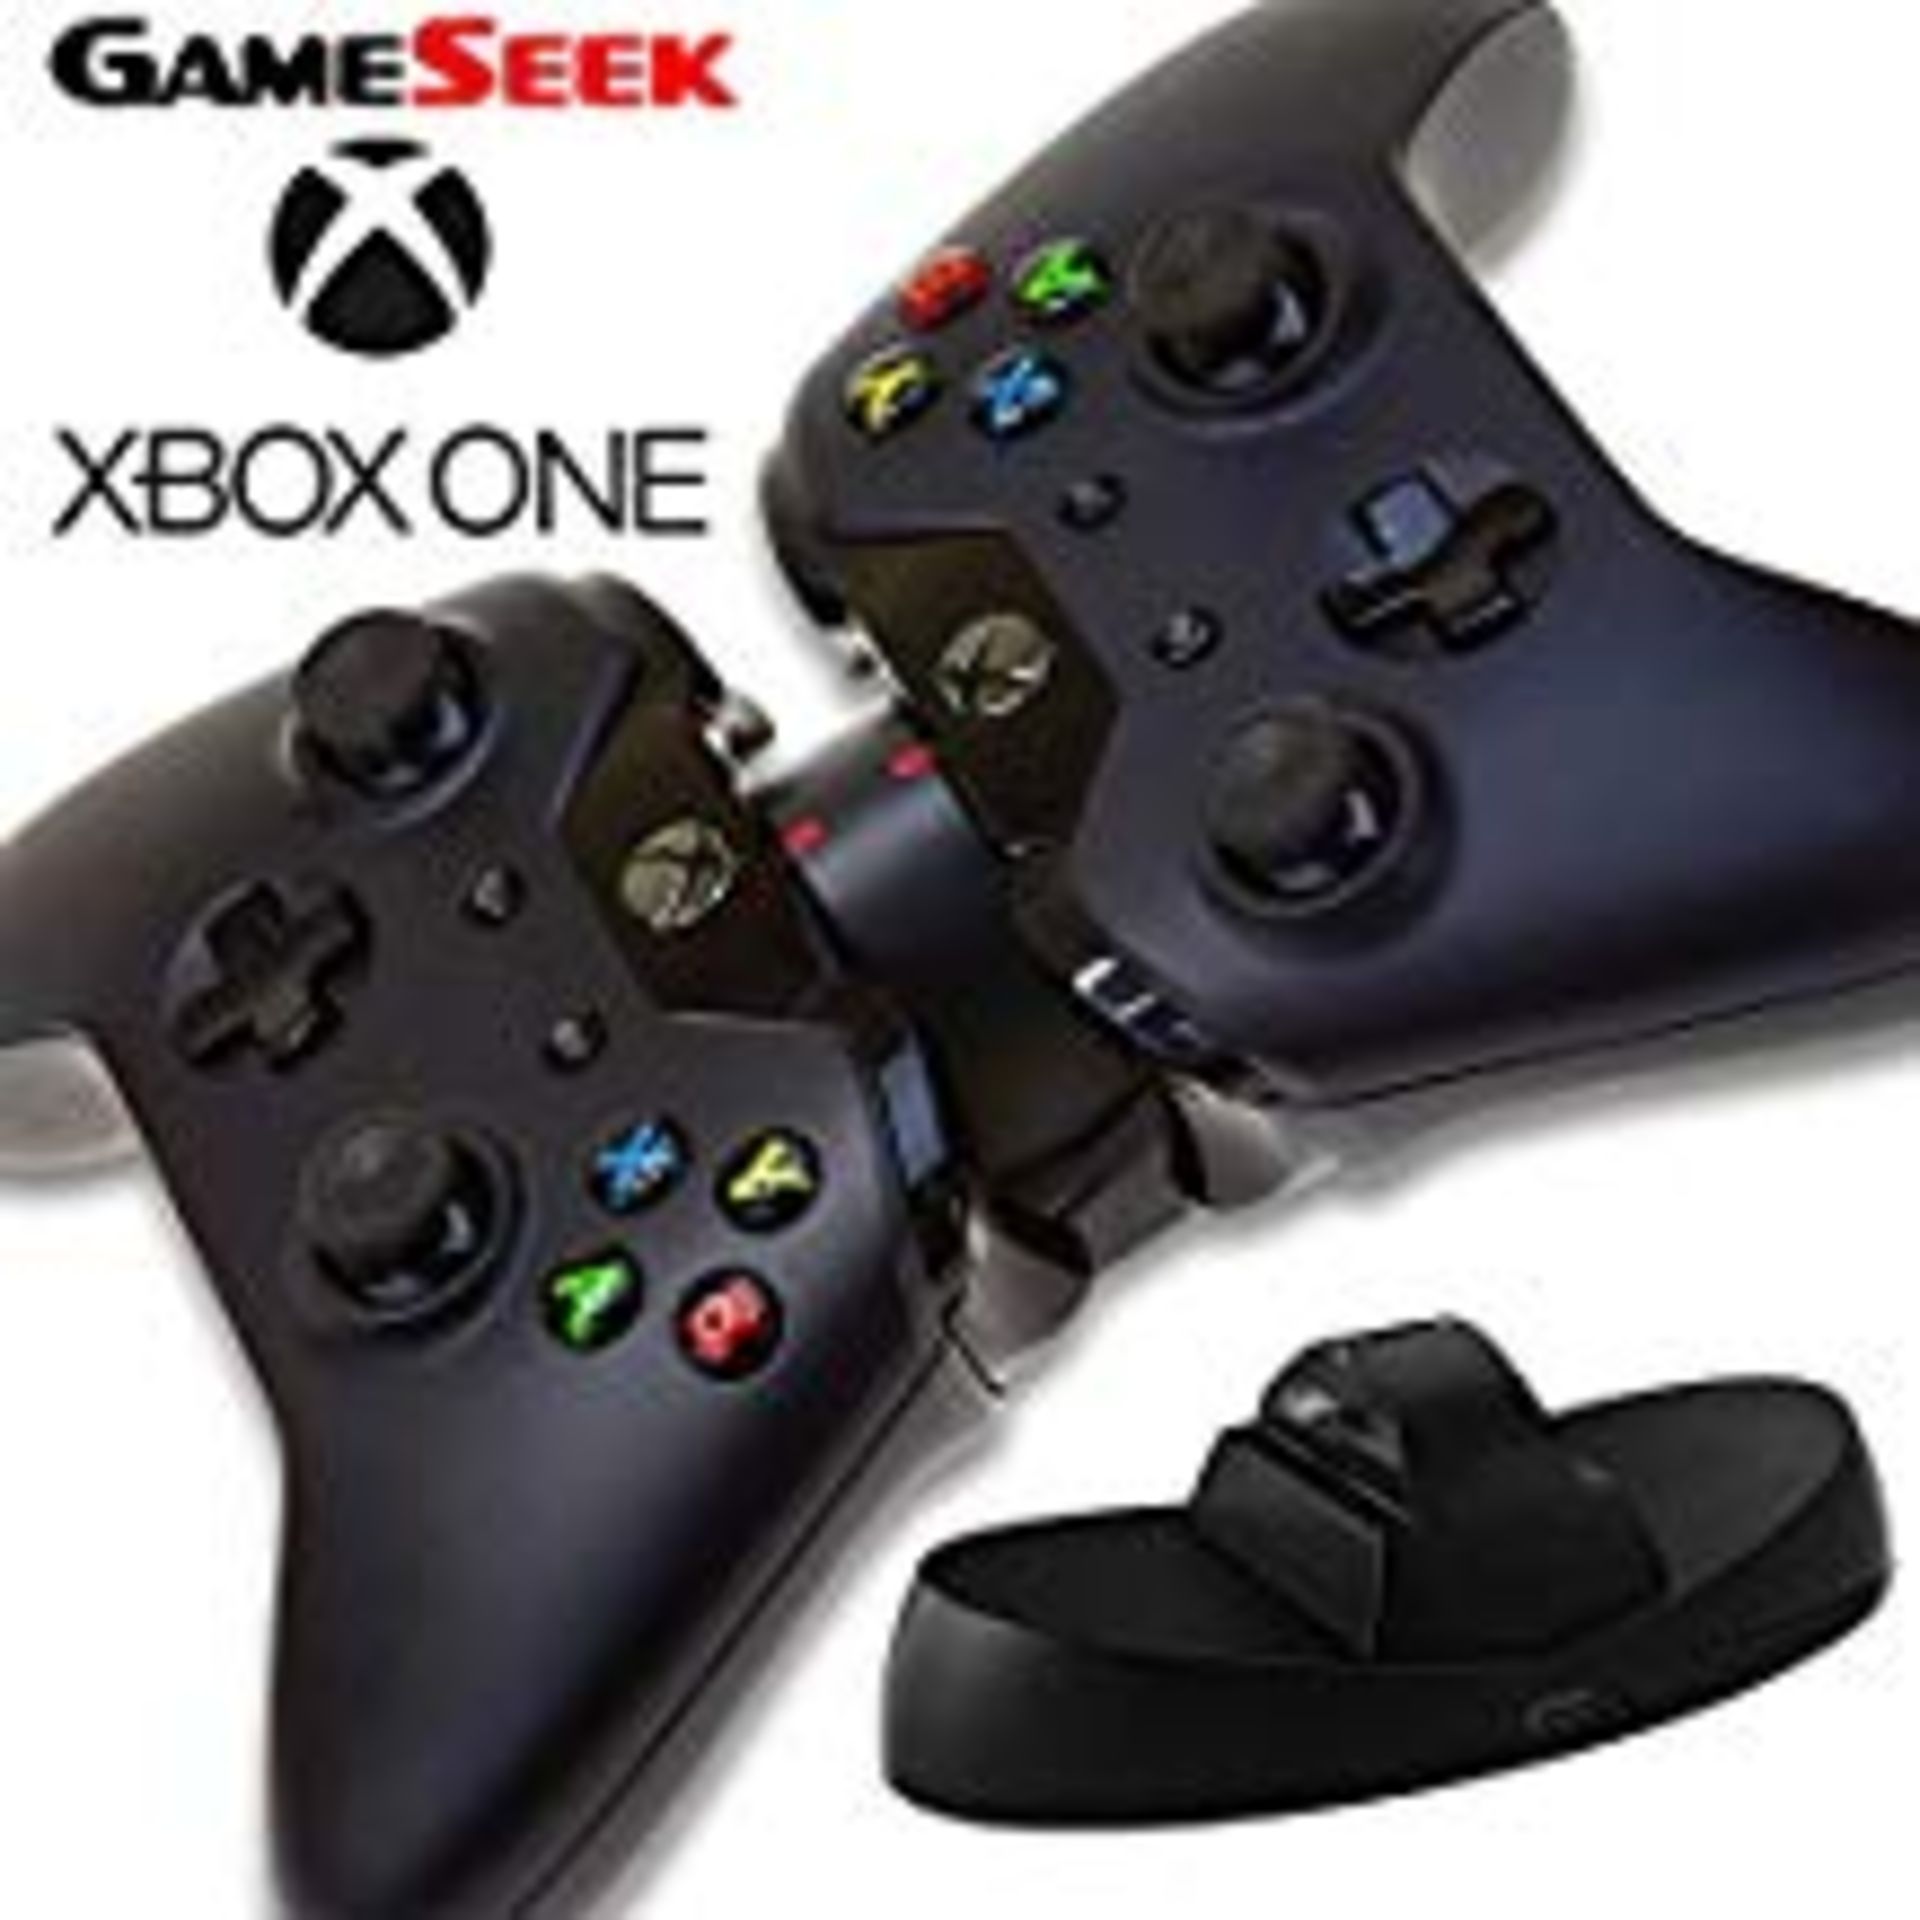 450 x Dual Controller Charge Dock for Xbox One (UK Model) | 5060399180047 | RRP £ 4495.50